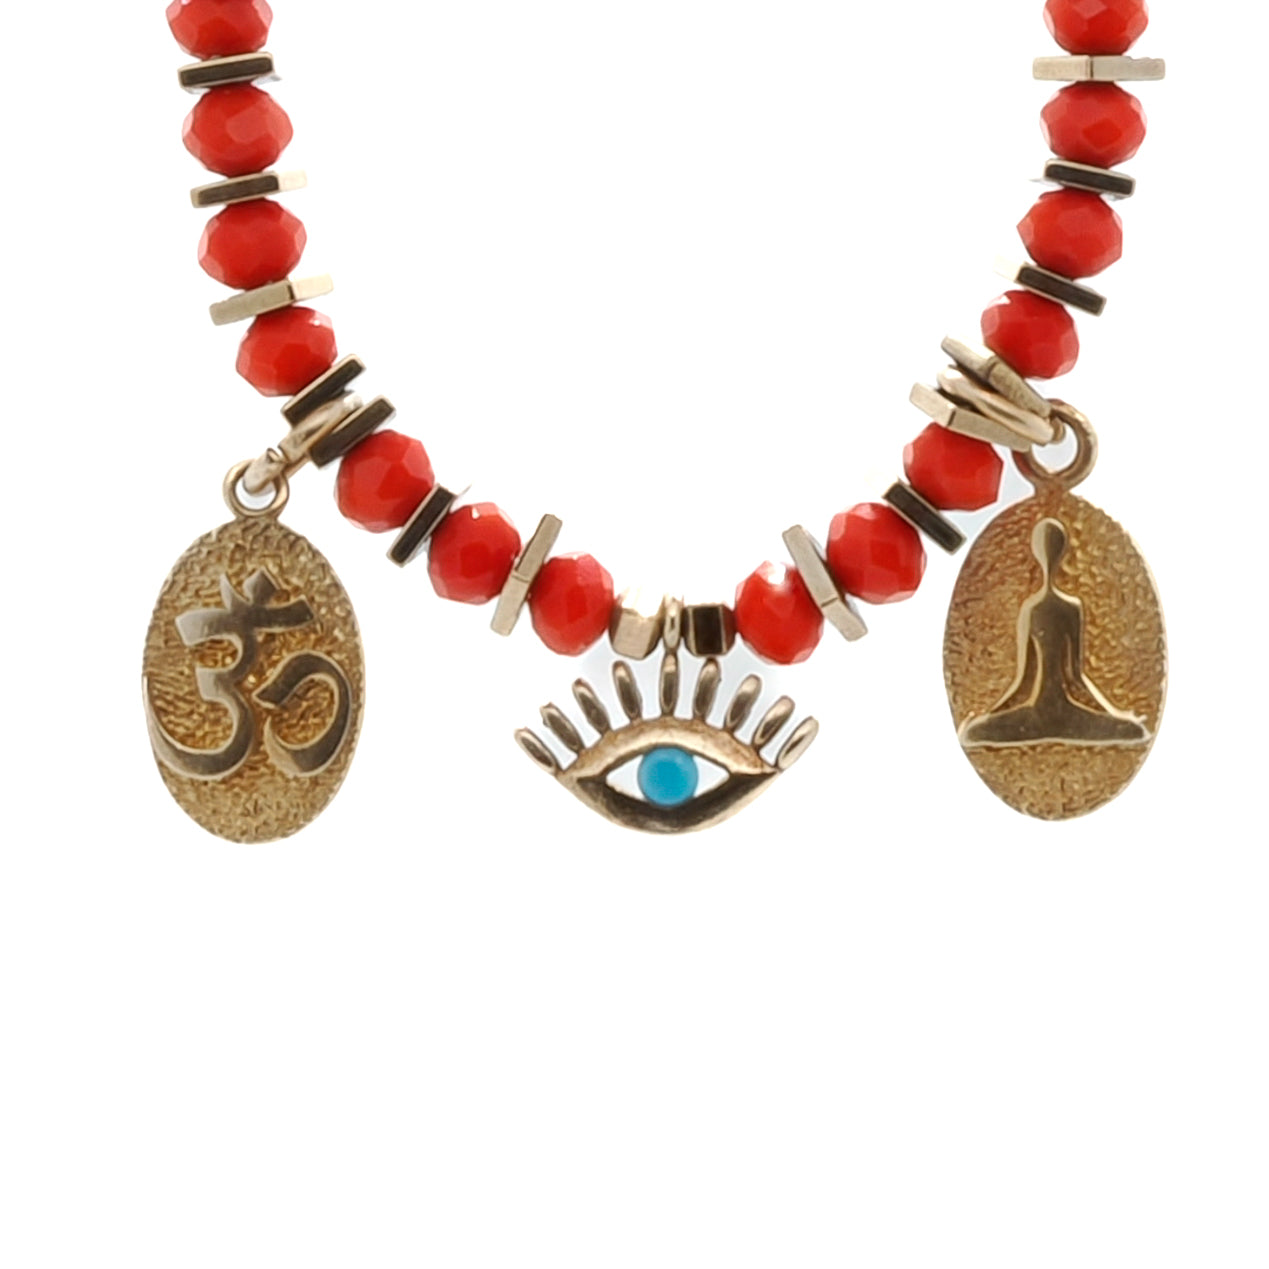 Handmade Yoga Girl Choker Necklace with dainty gold charms and red crystal beads.